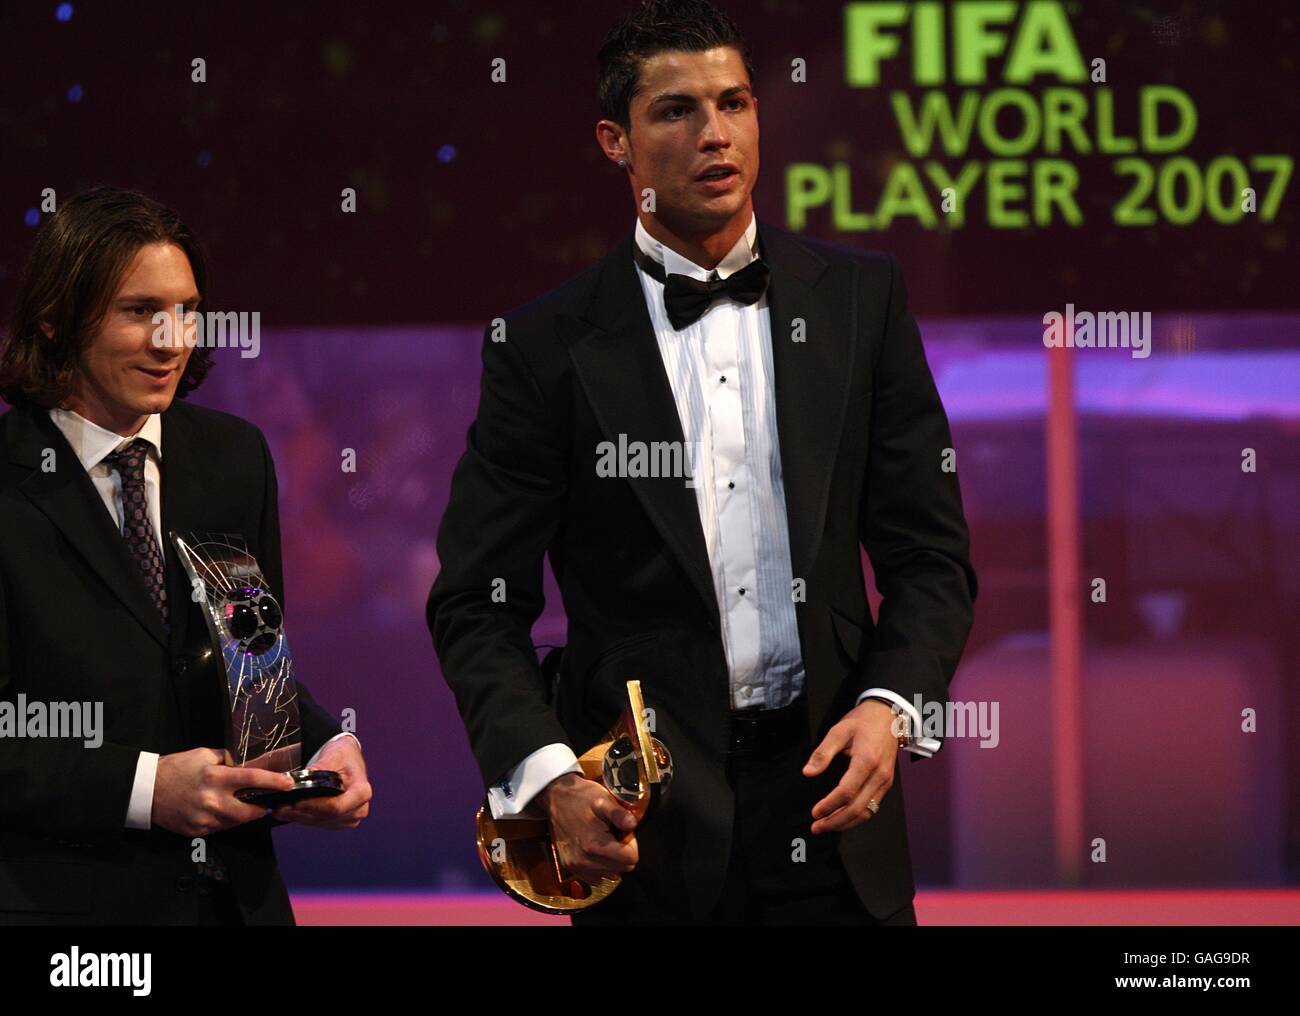 Barcelona's Lionel Messi after he was named runner up in the FIFA World Player of the Year and their placed Manchester United's Cristiano Ronaldo at the FIFA World Player Gala Stock Photo